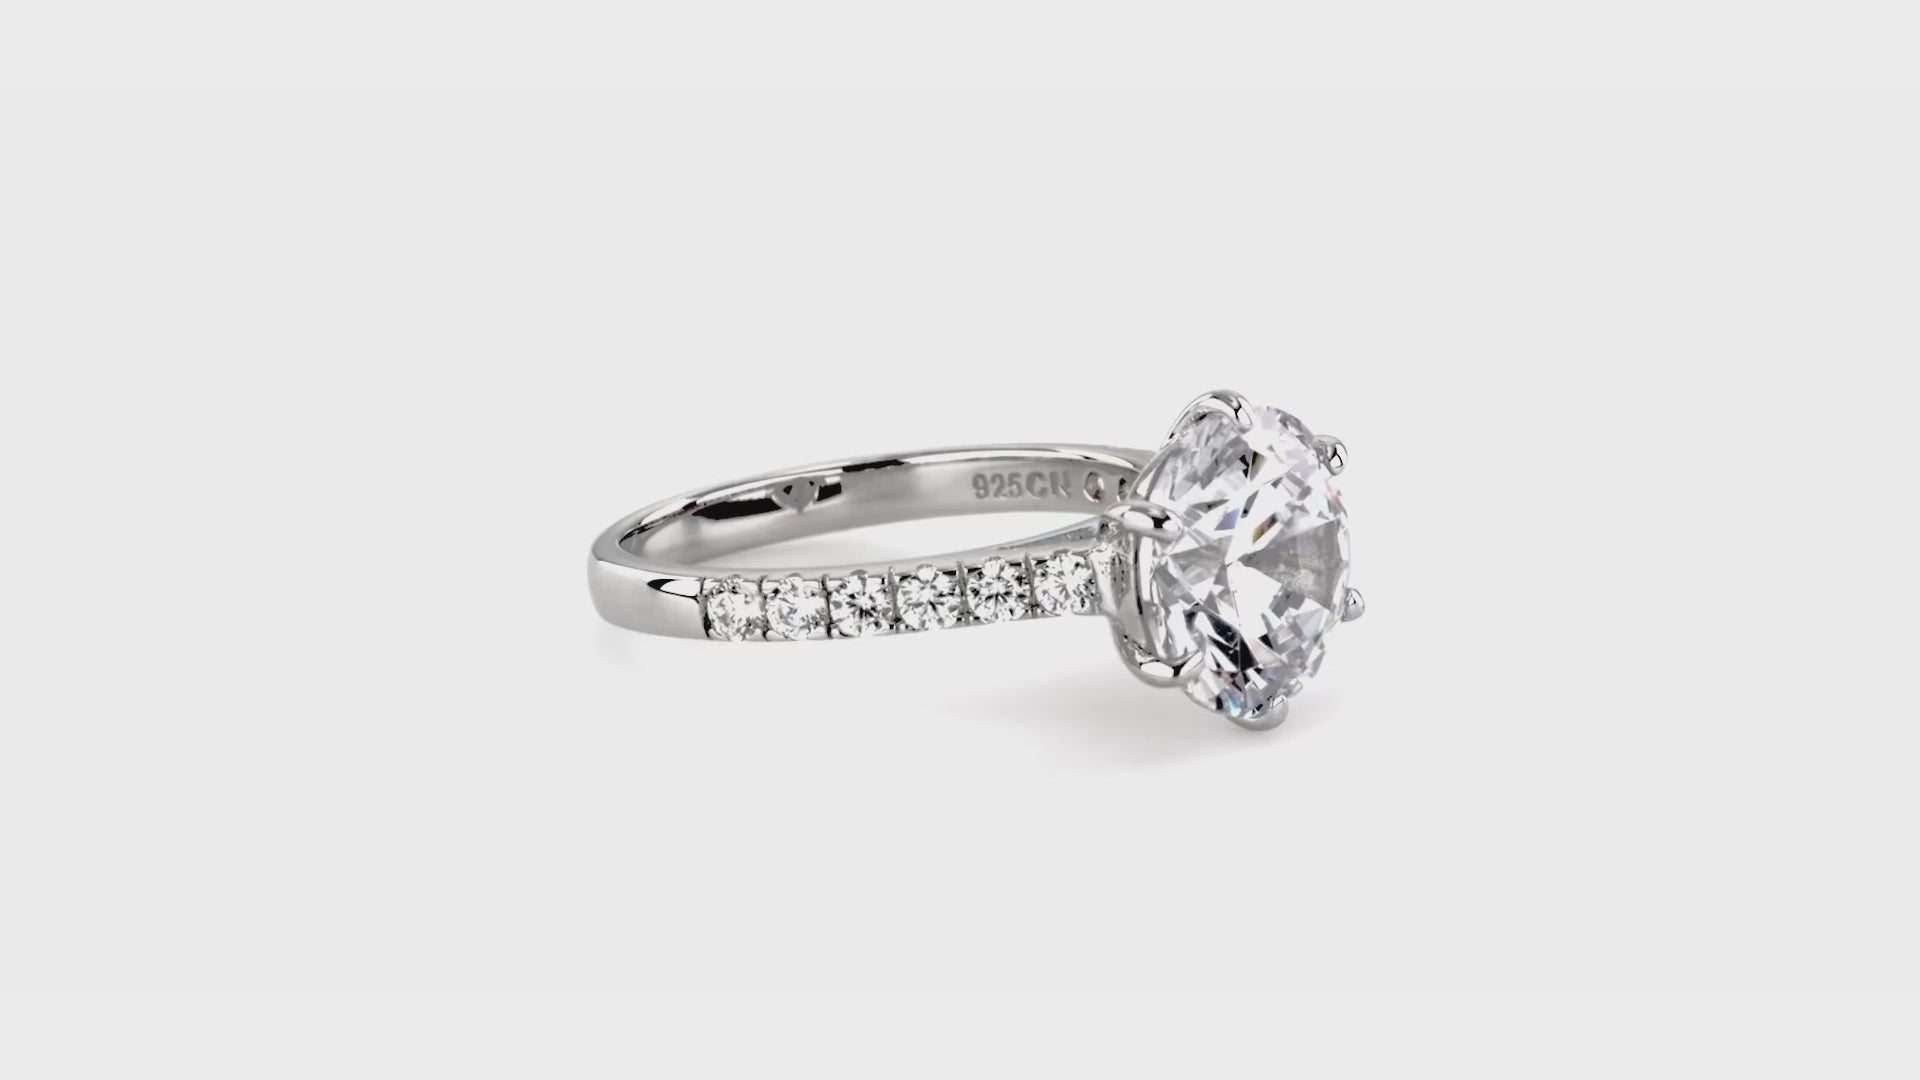 Video Contains Solitaire 3.8ct Round CZ Statement Ring in Sterling Silver. Style Number R1277-01